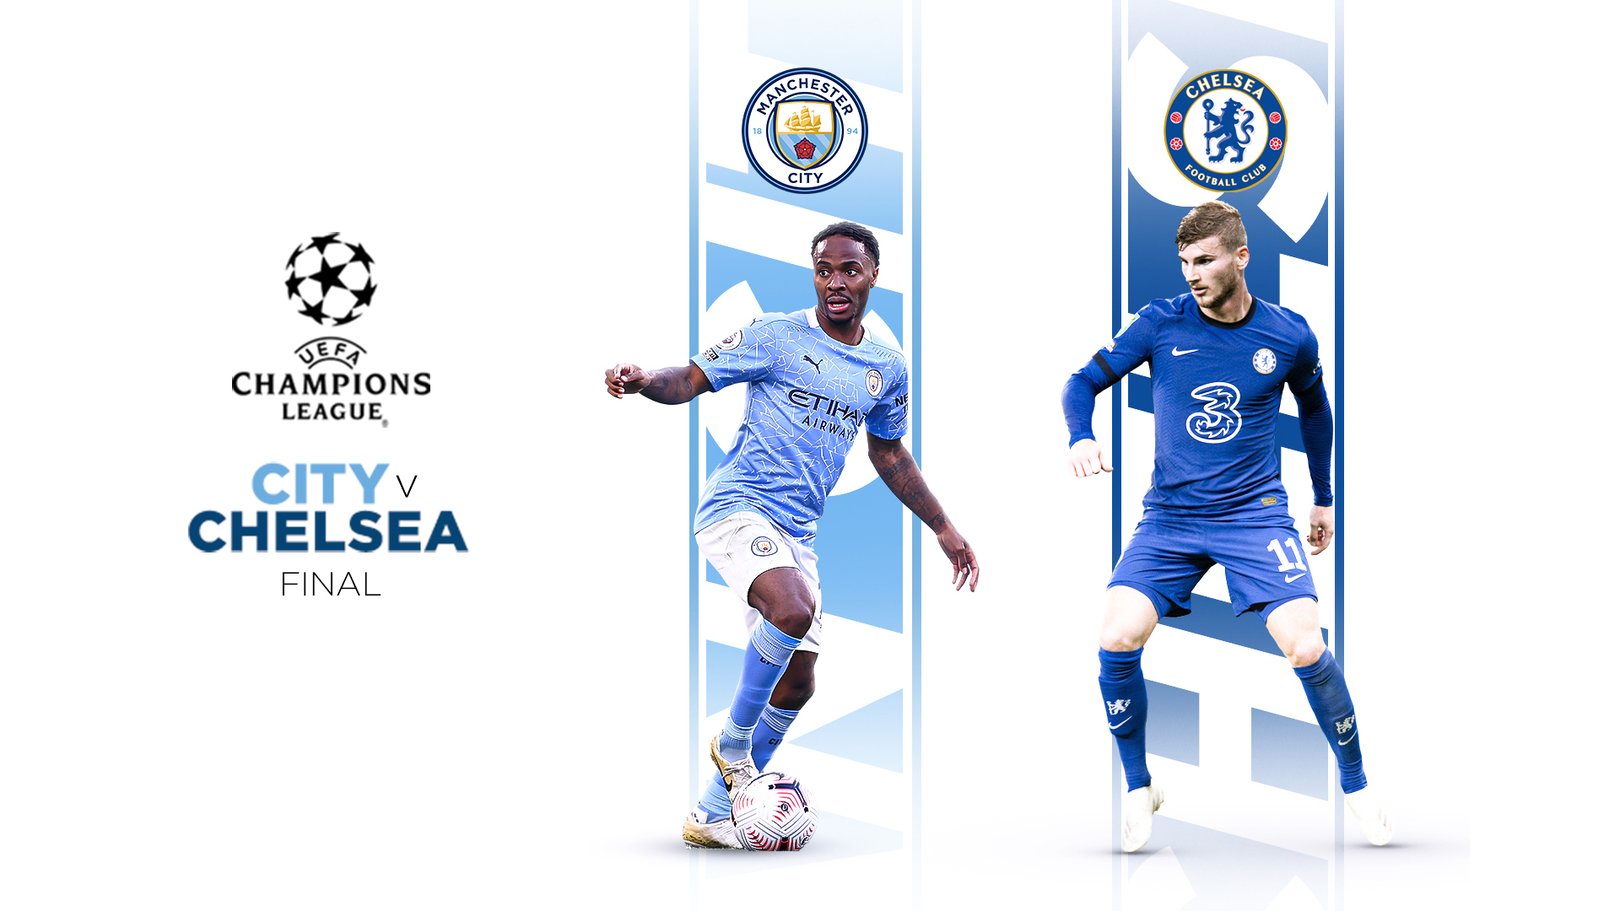 City to face Chelsea in Champions League final